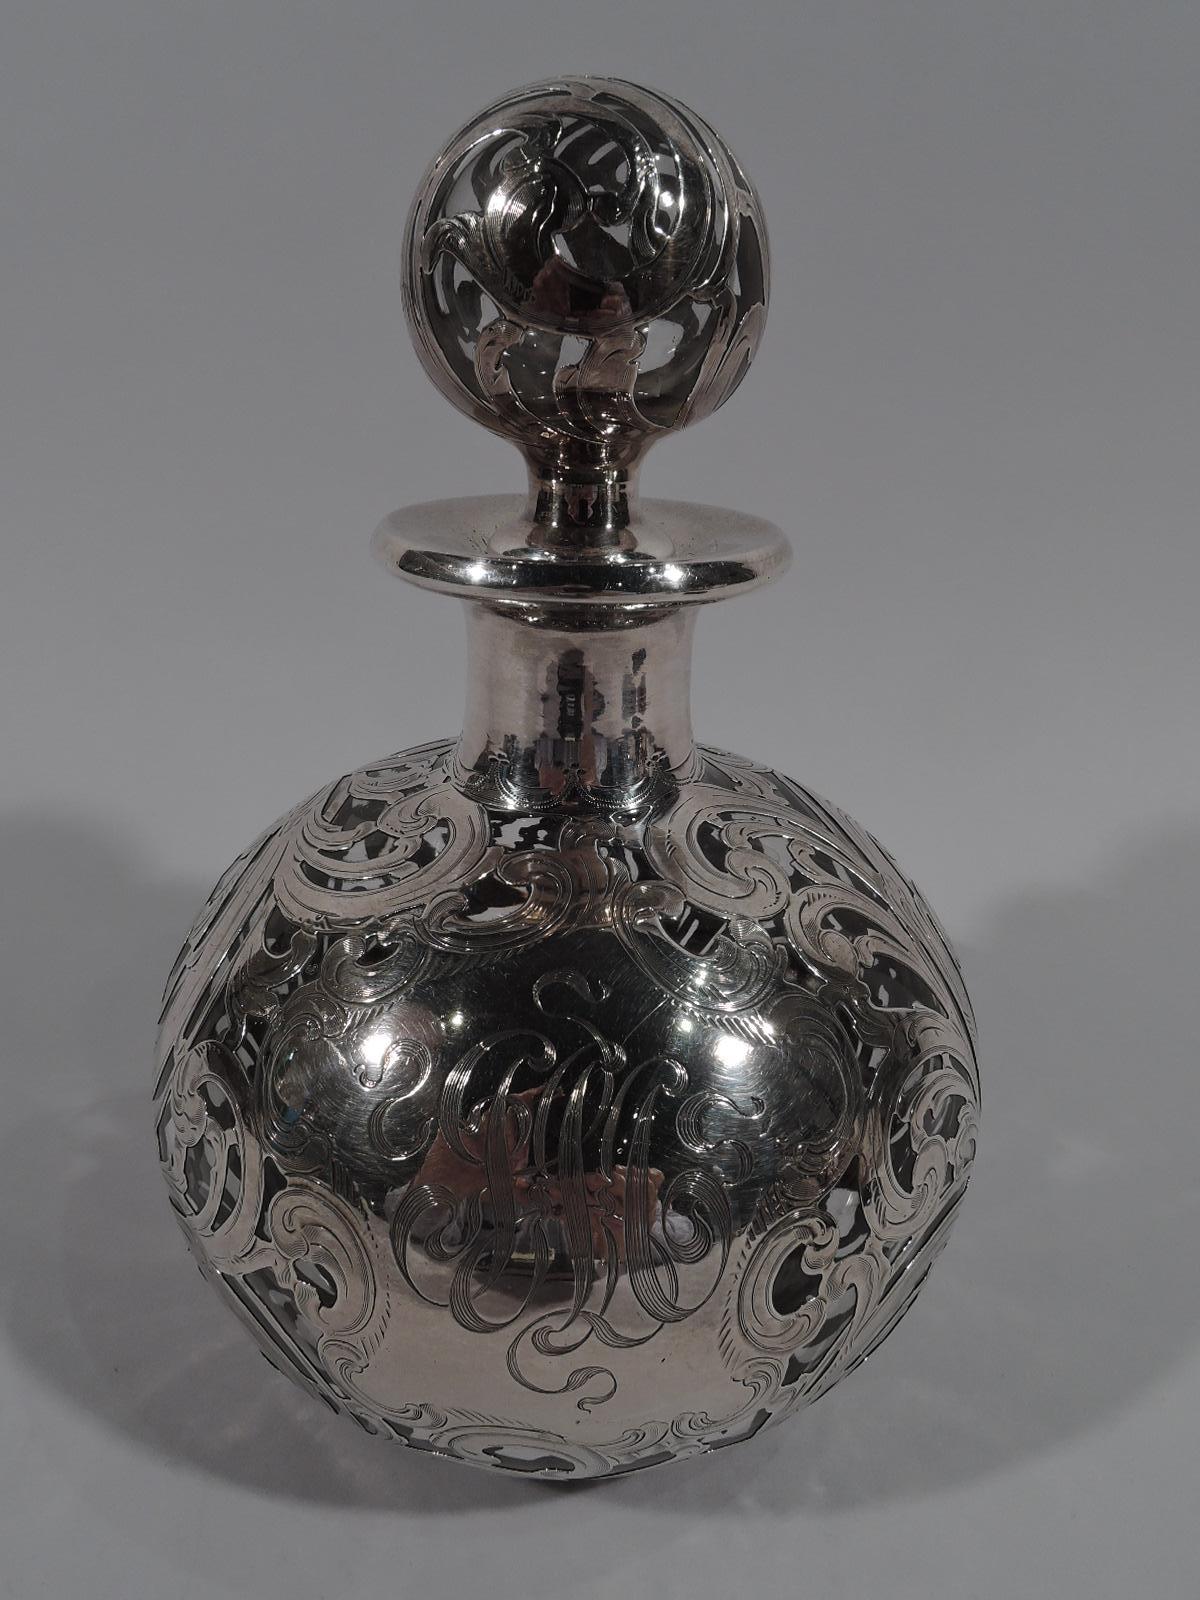 Large turn-of-the-century Art Nouveau glass cologne bottle with engraved silver overlay. Made by Alvin in Providence. Globular; short neck and everted rim in collar. Ball stopper. Dense and leafing rinceaux overlay. Large scrolled cartouche engraved